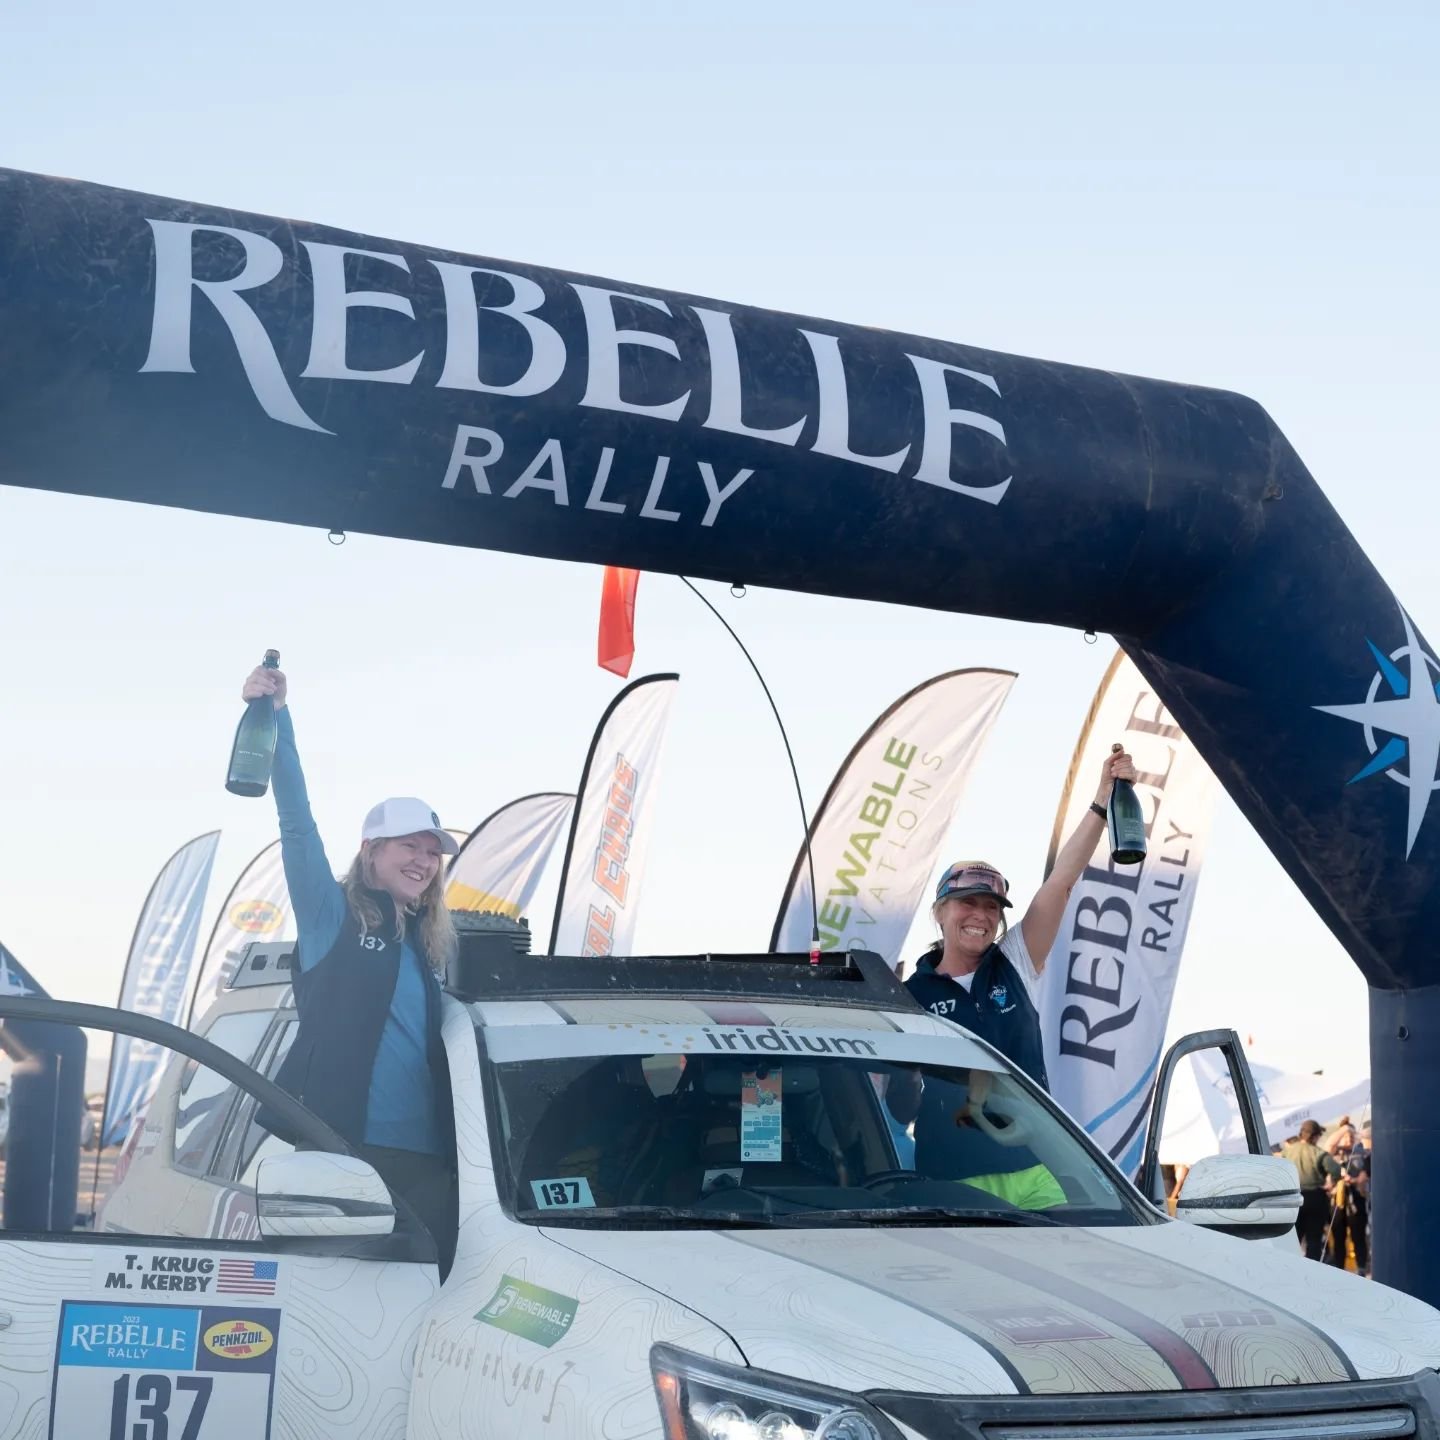 Officially announcing we'll be competing again in this year's @rebellerally! We can't wait and we're so excited that we already have a sponsor - @rux.life ! Their storage systems came in handy last year with all the camp gear, recovery equipment, clo